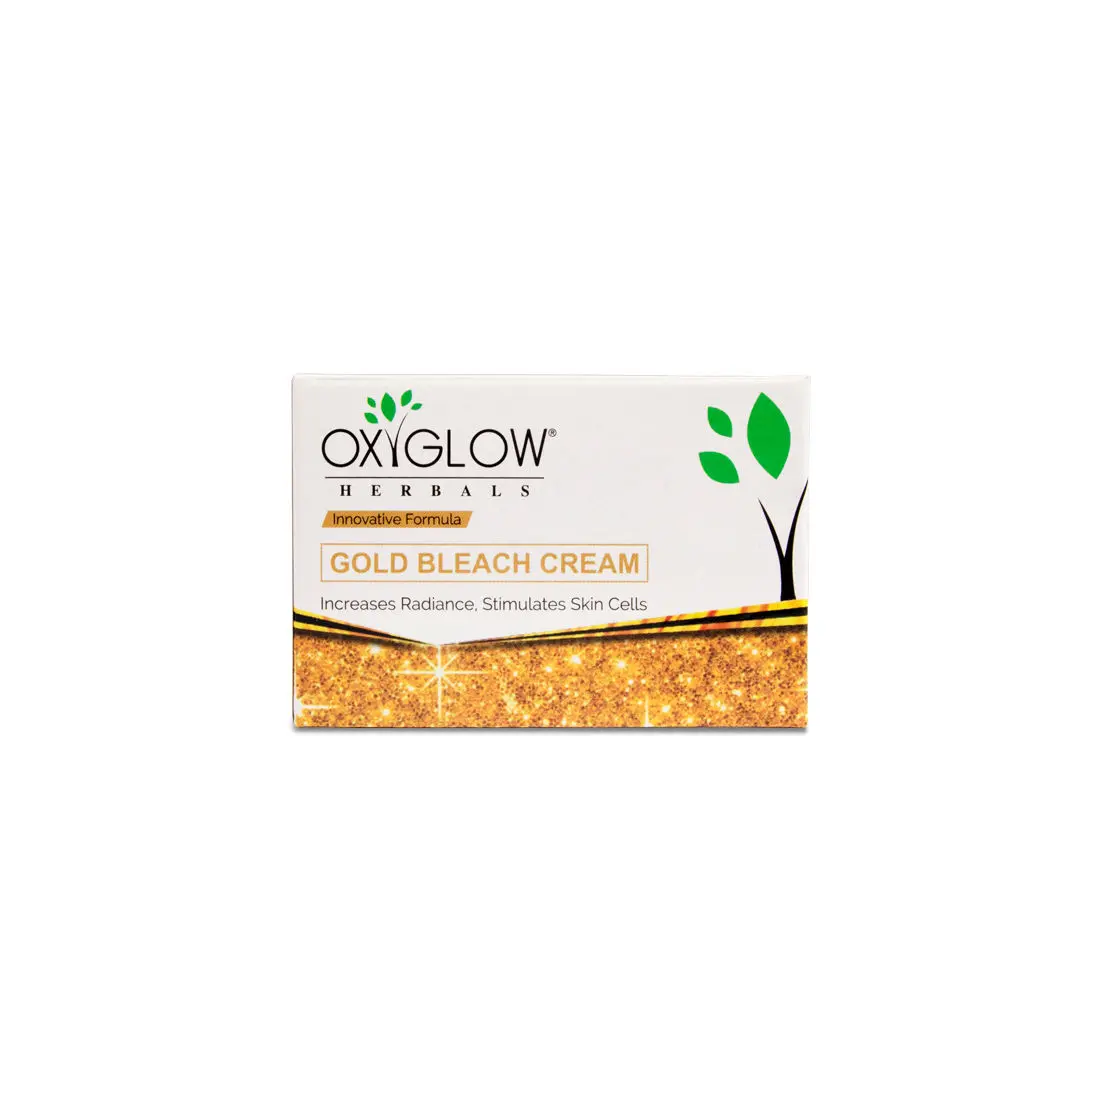 OxyGlow Herbals Gold Bleach Cream 50 gm, Increases Radiance Stimulates skin cells